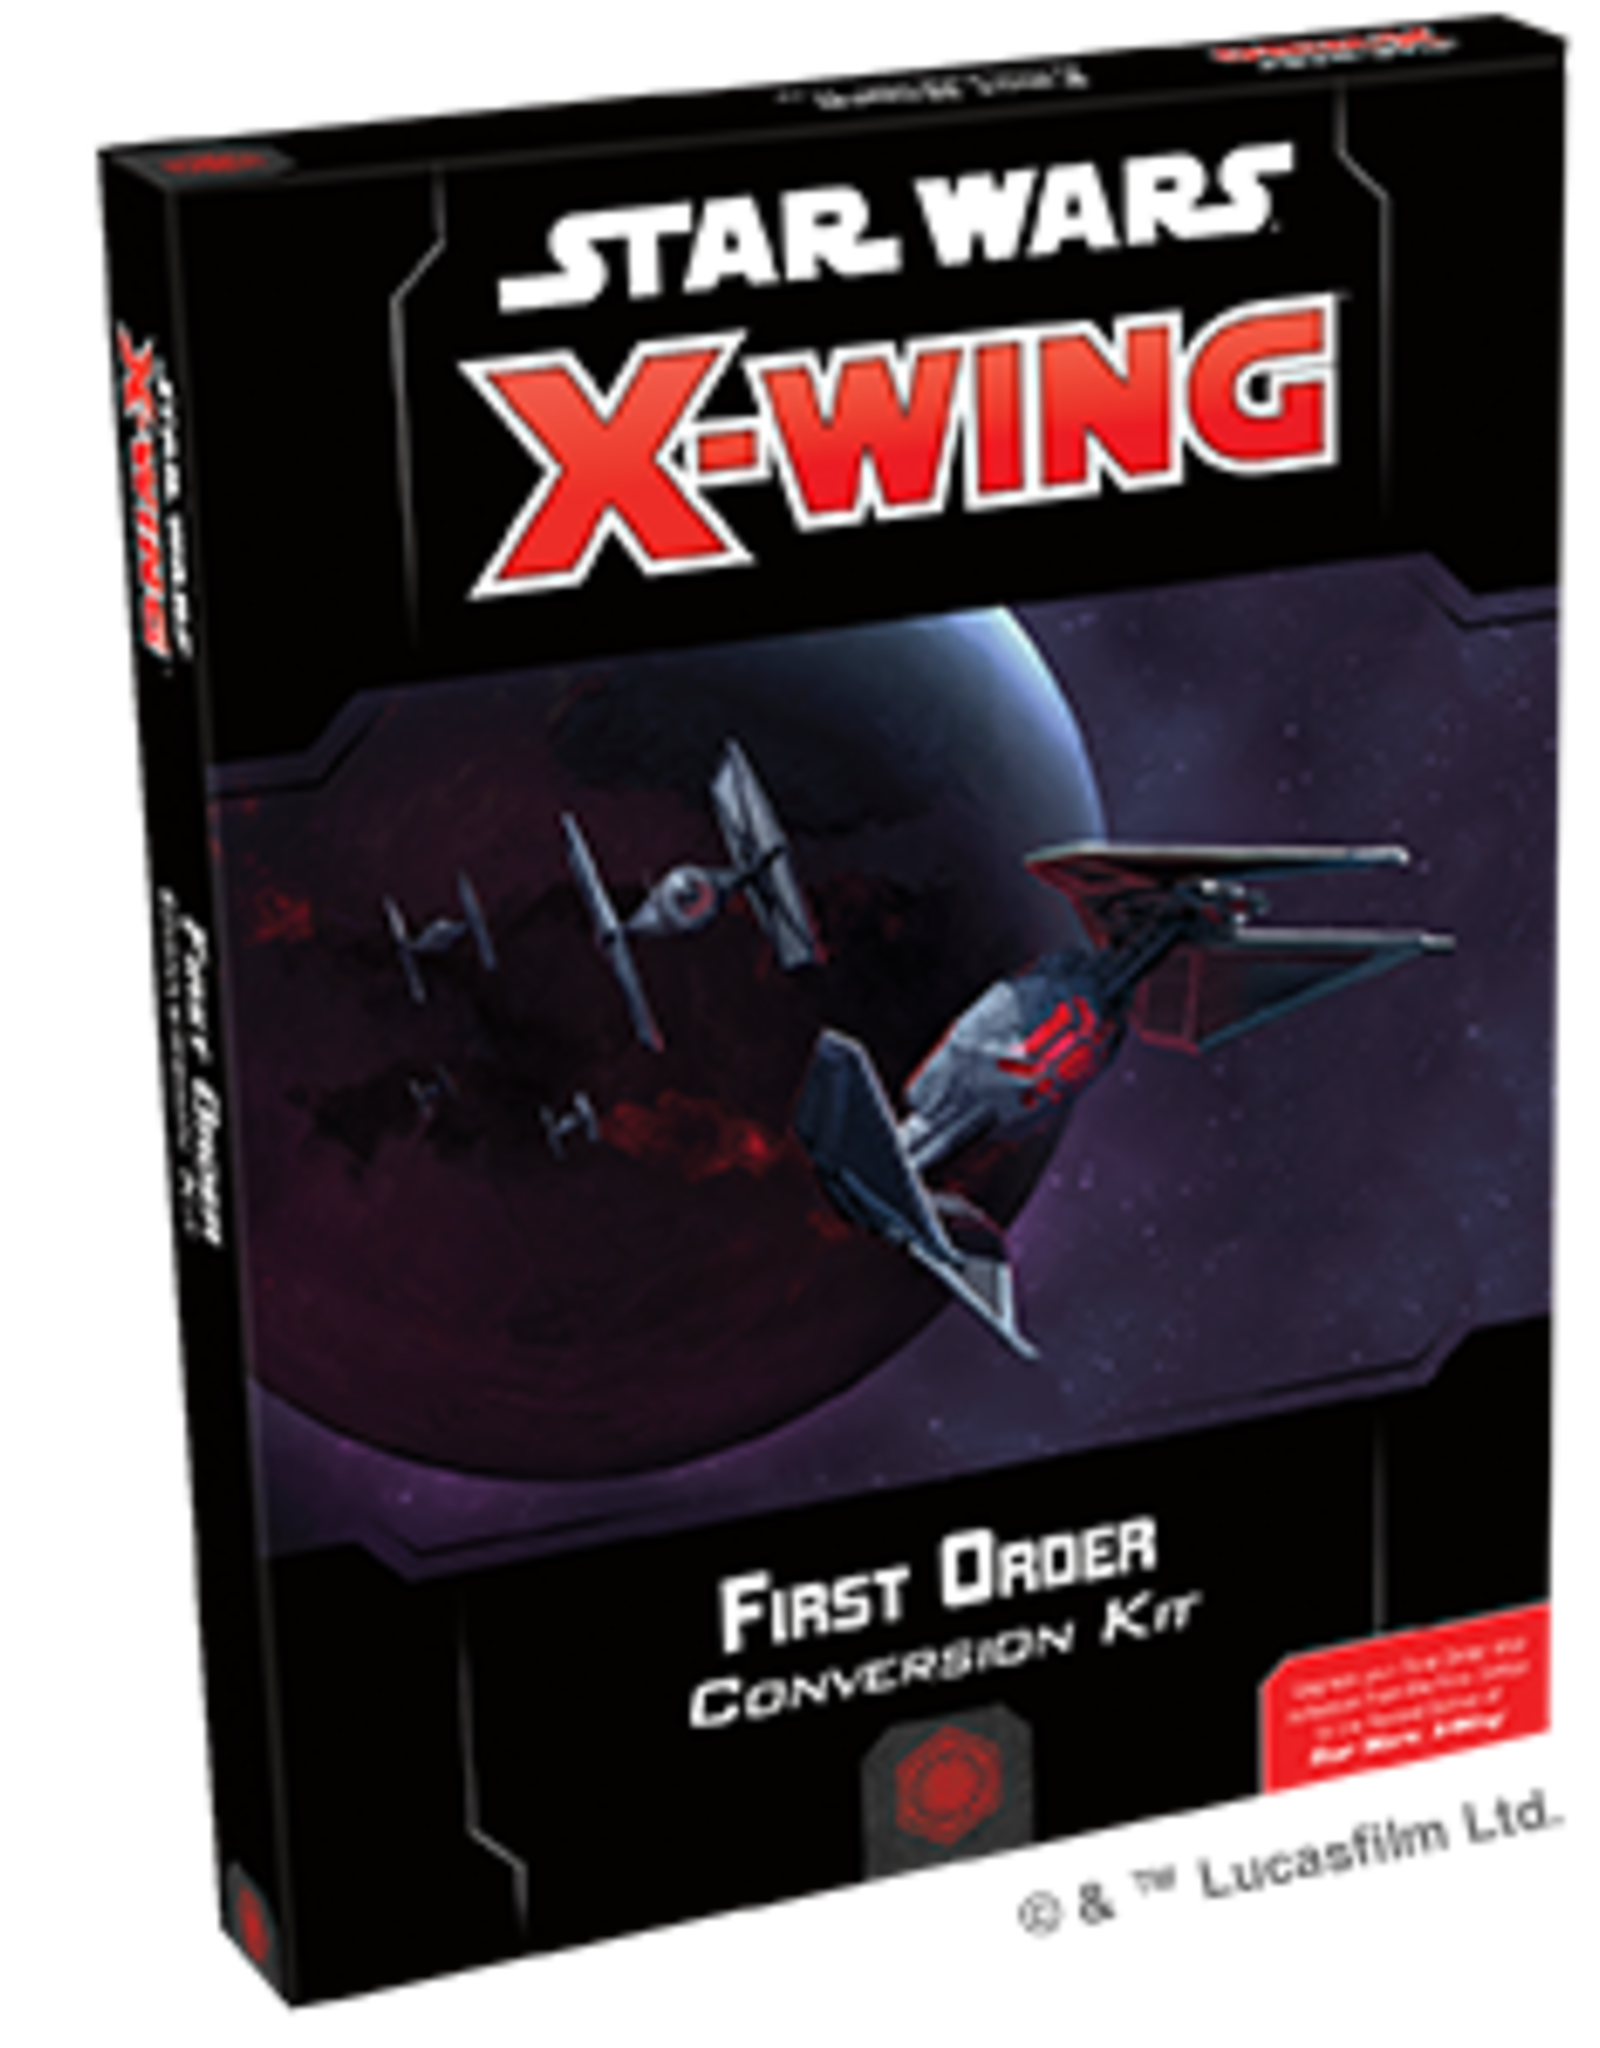 FFG Star Wars X-Wing 2.0: First Order Conversion Kit